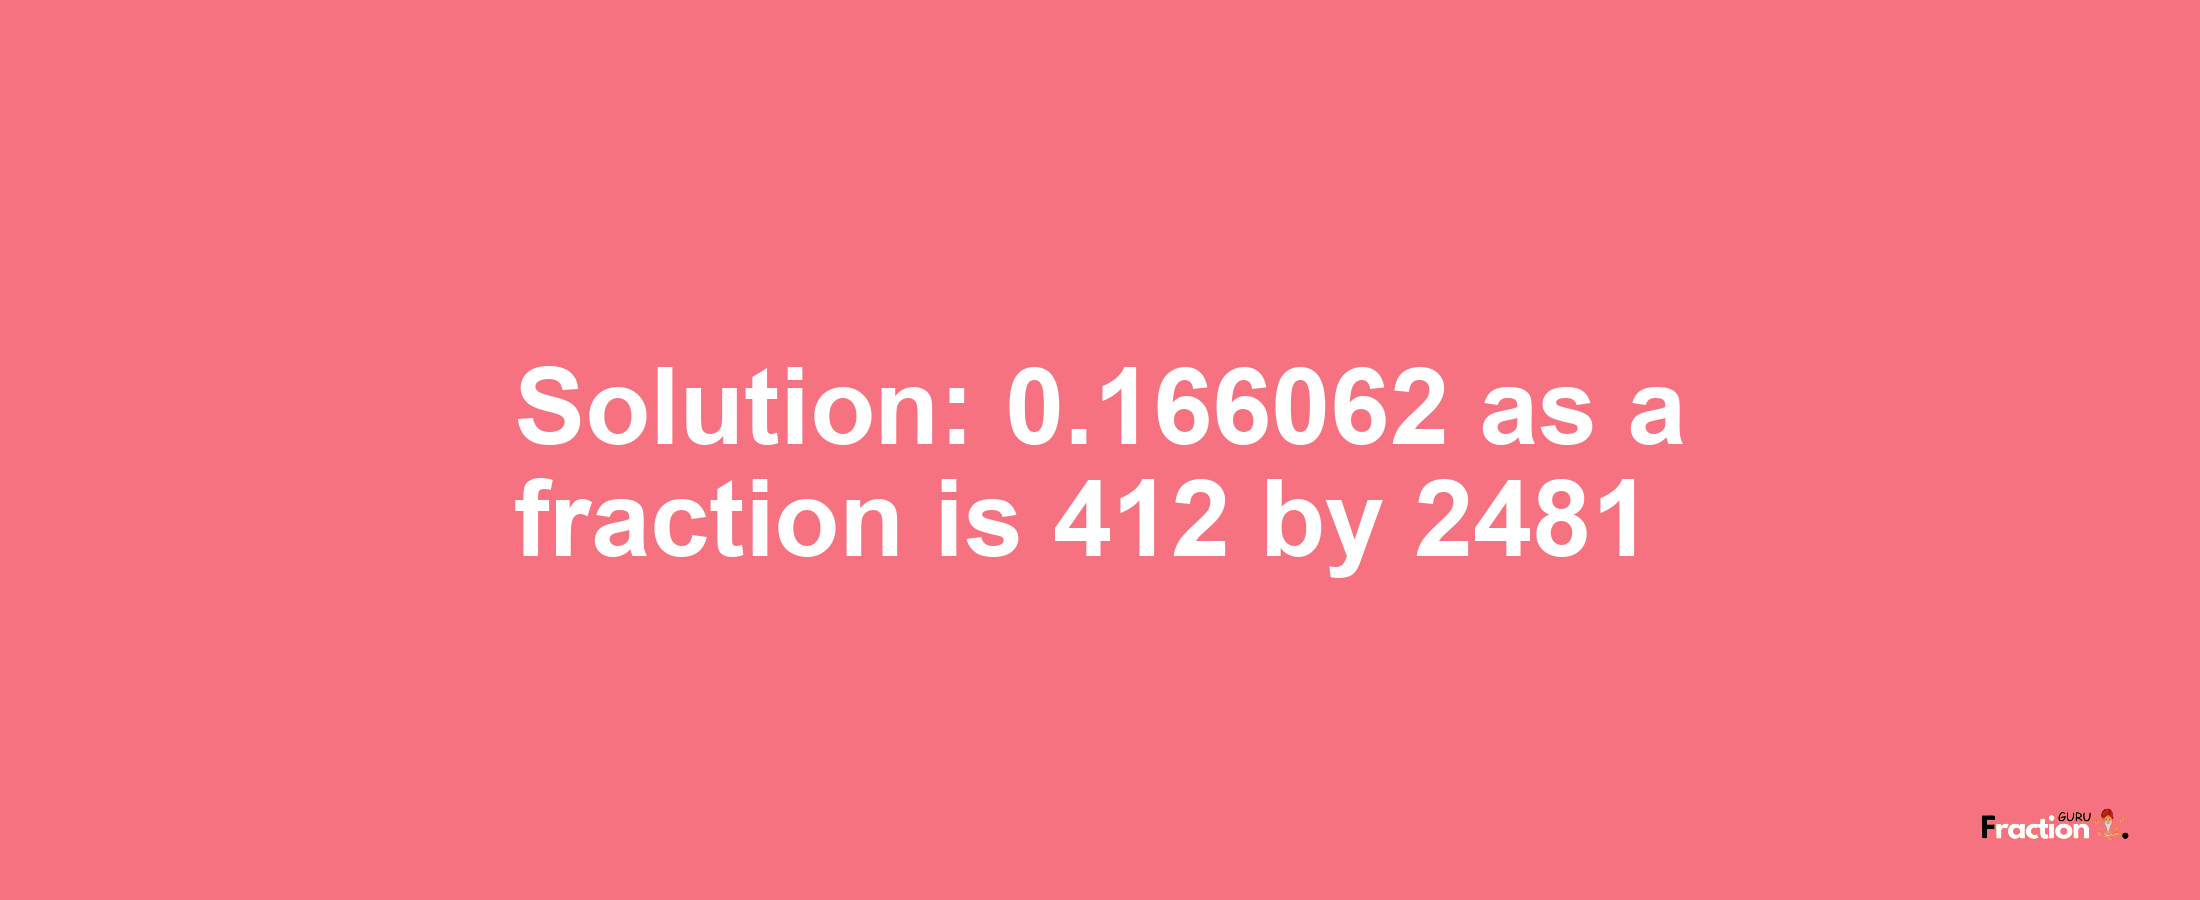 Solution:0.166062 as a fraction is 412/2481